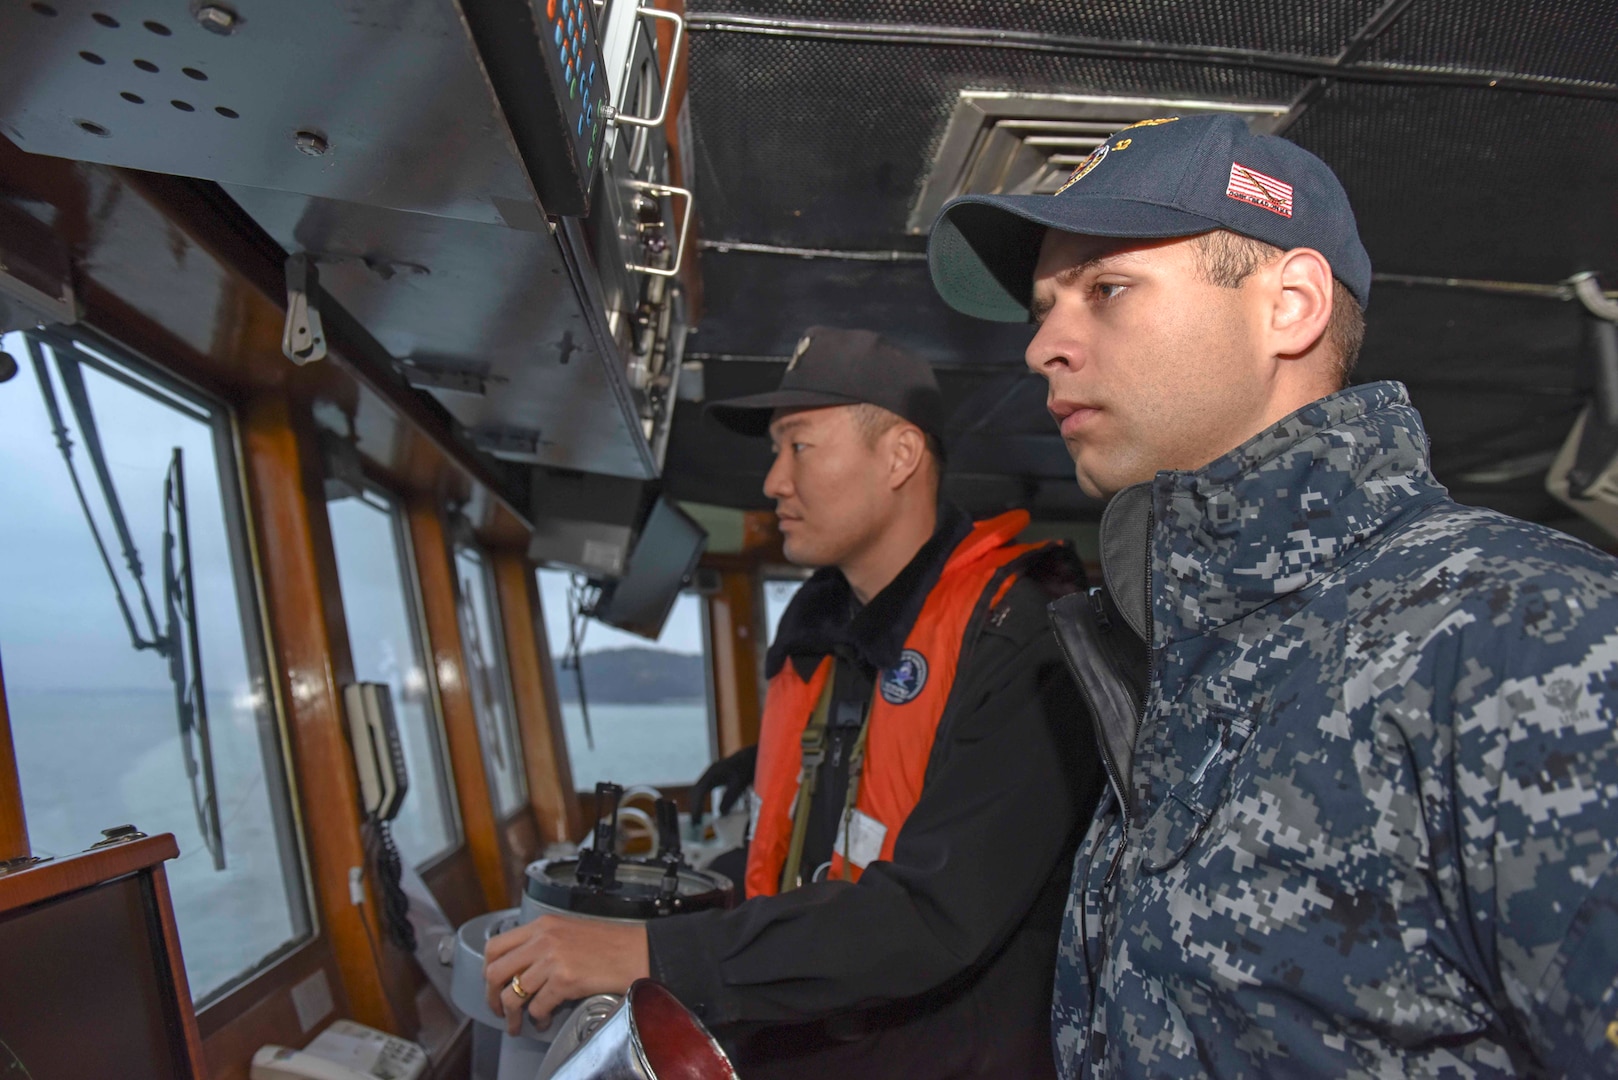 Lt. j.g. David Dinkins, ships navigator for USS Barry (DDG 52) tours Republic of Korea (ROK) ship Bucheon (PCC 773) during the officer exchange program Combined Edge, Dec. 22, 2016. “Combined Edge” is a program focusing on improving combined war fighting integration between the U.S. and ROK navies by allowing U.S. Navy officers to embark on ROK navy ships. 